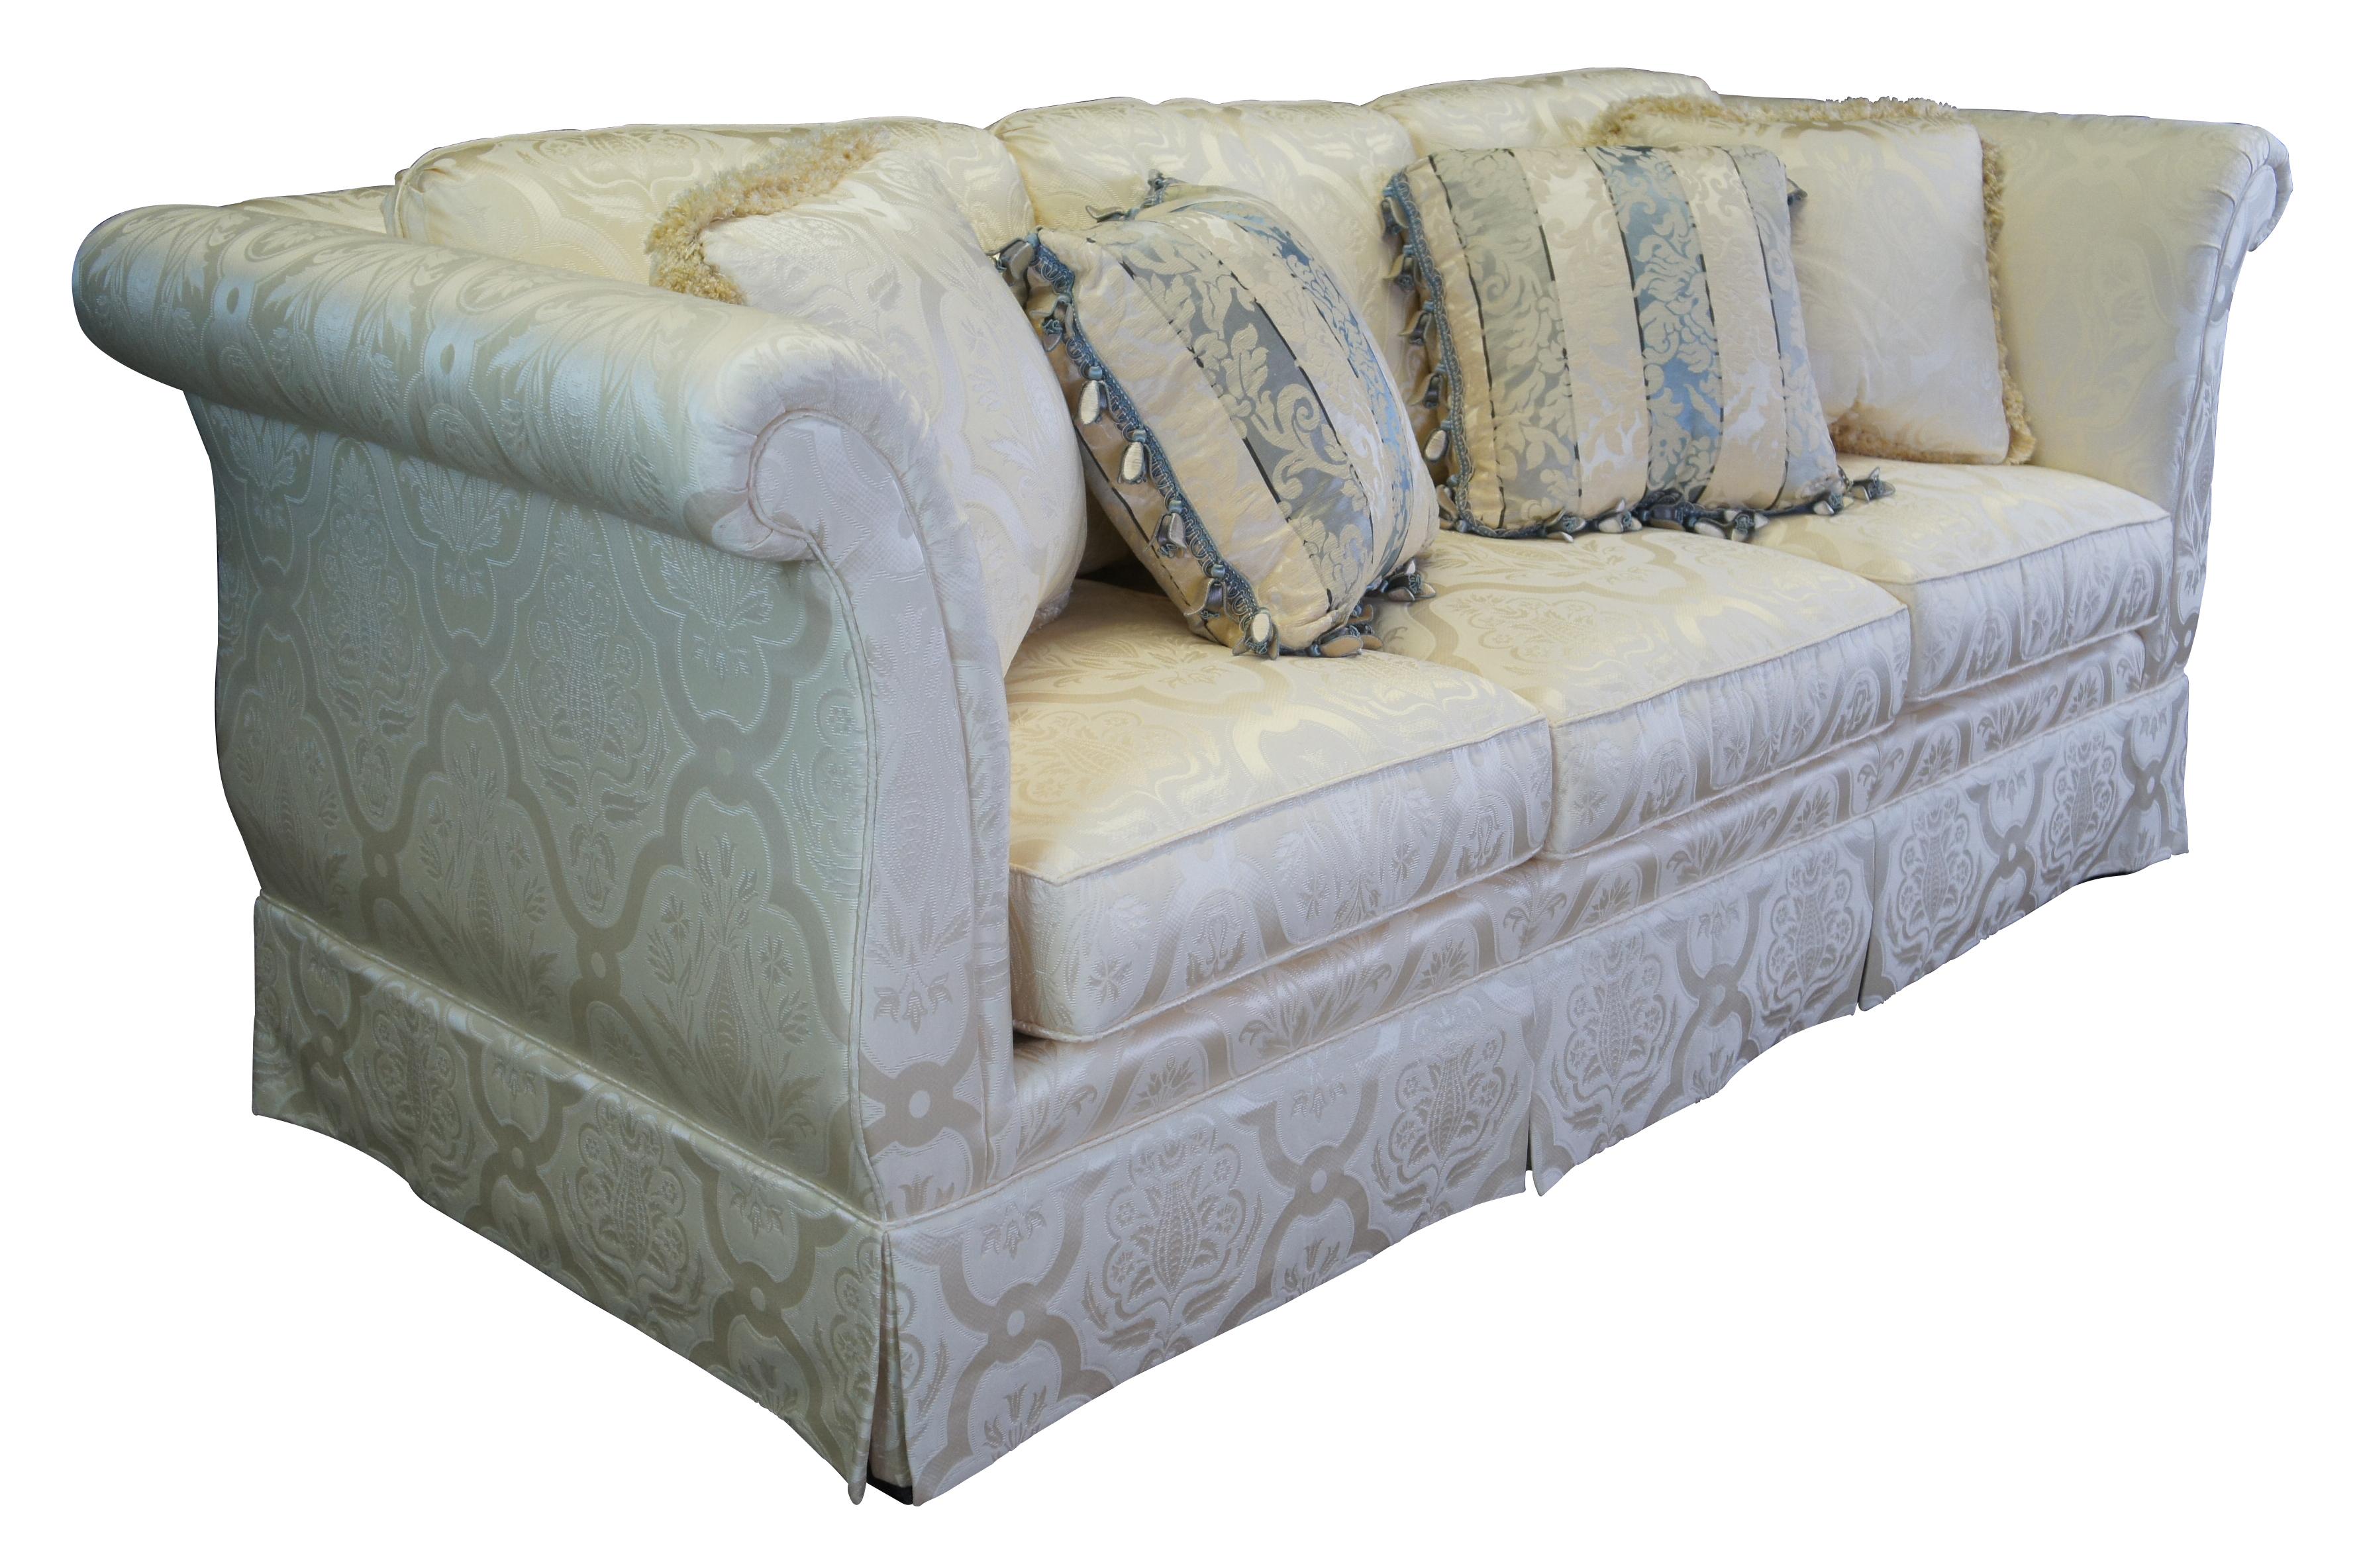 Vintage Taylor King three seat sofa or couch featuring a down filled silk Damask fabric with skirted base and high rolled arms and back.  Includes lumbar pillows with tulip tassels.  White / off-white / silver / blue.

Dimensions:
40